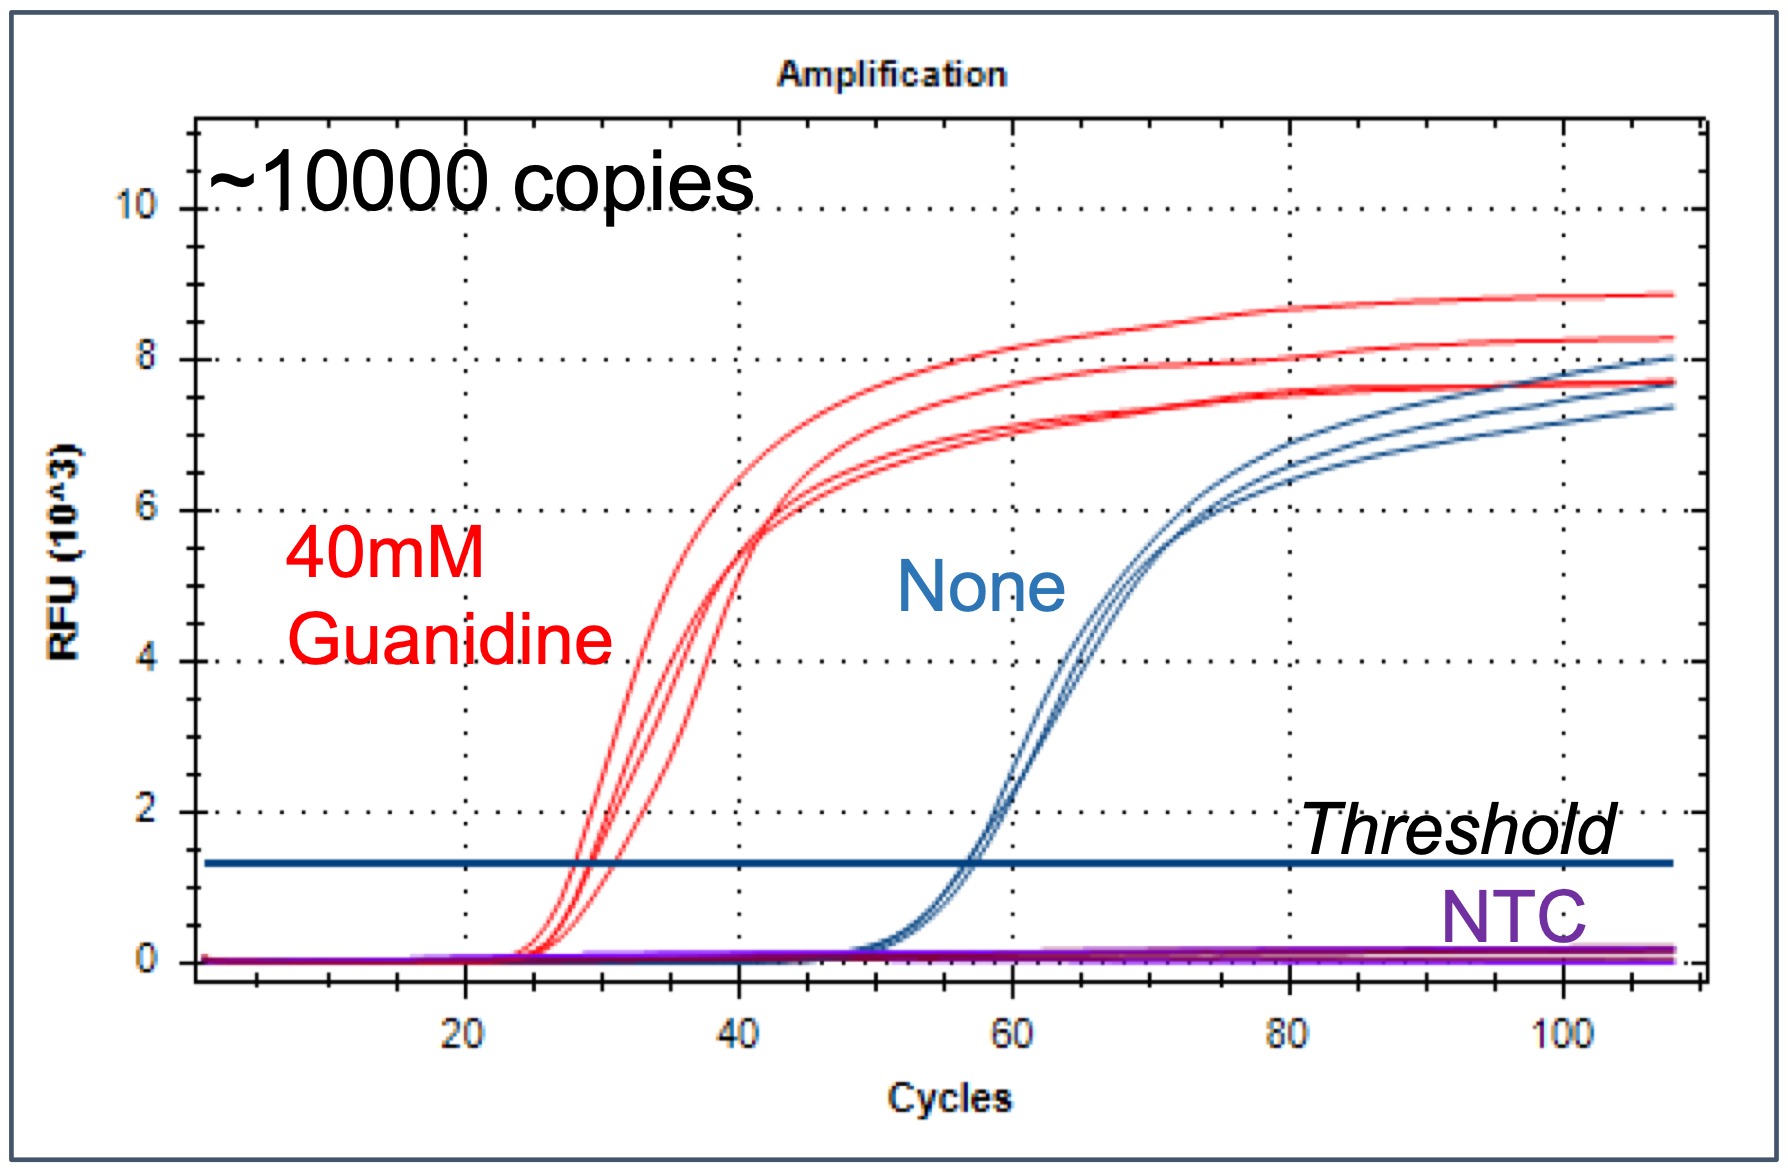 Figure 4. Impact of Guanidine Hydrochloride on detection speed